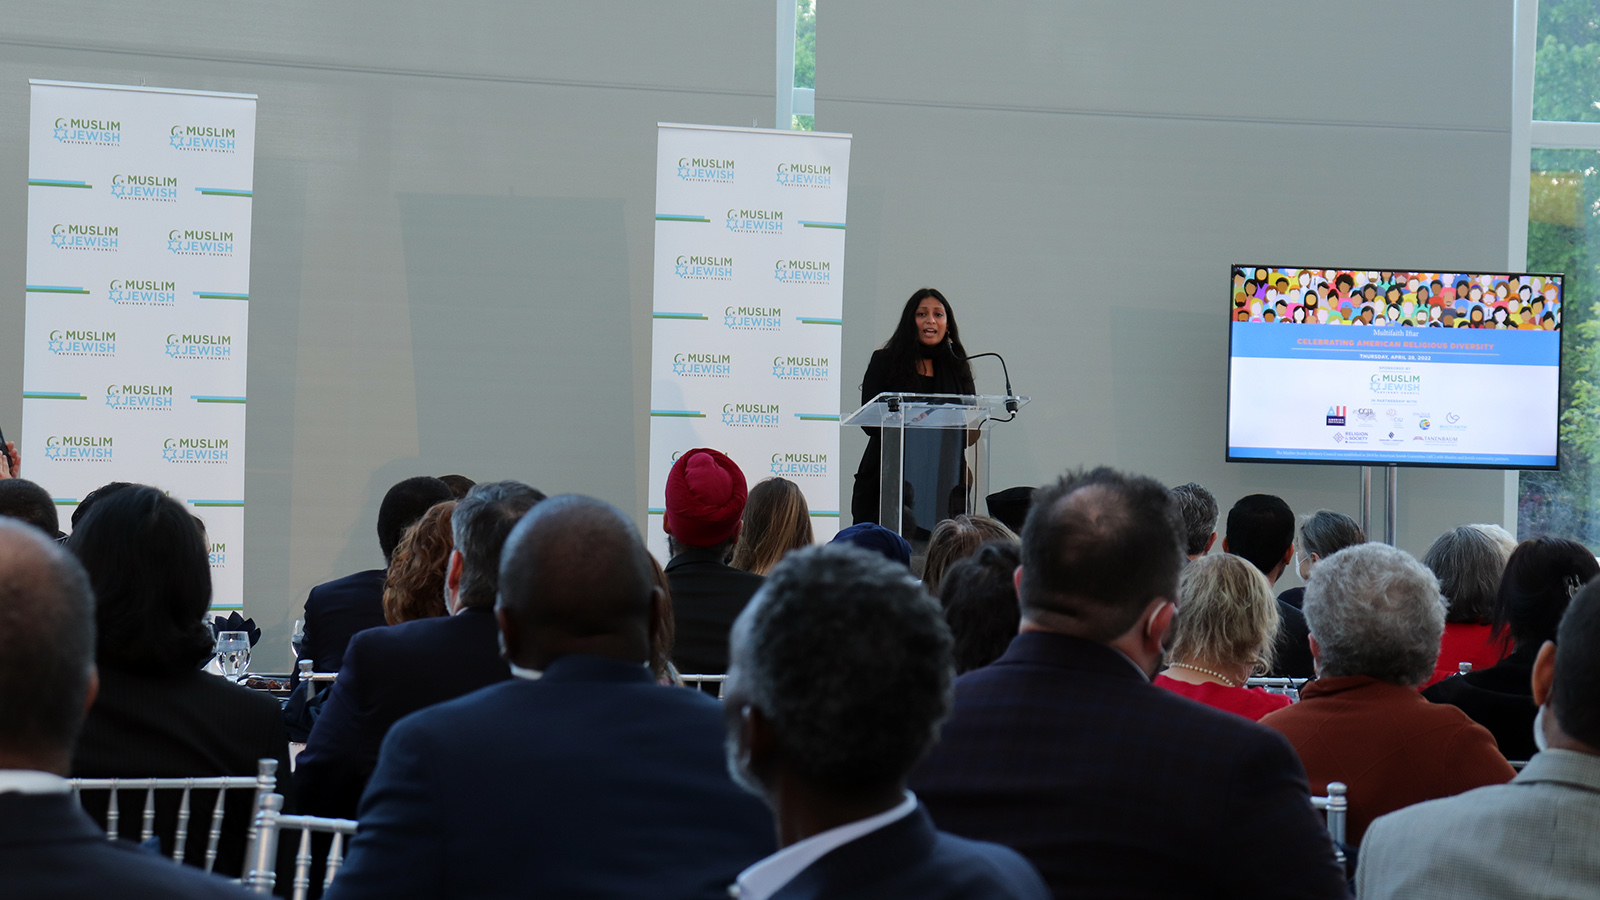 Nina Fernando, executive director of Shoulder to Shoulder, sings during a multifaith iftar at the U.S. Institute of Peace headquarters in Washington, D.C., Thursday, April 28, 2022. RNS photo by Adelle M. Banks